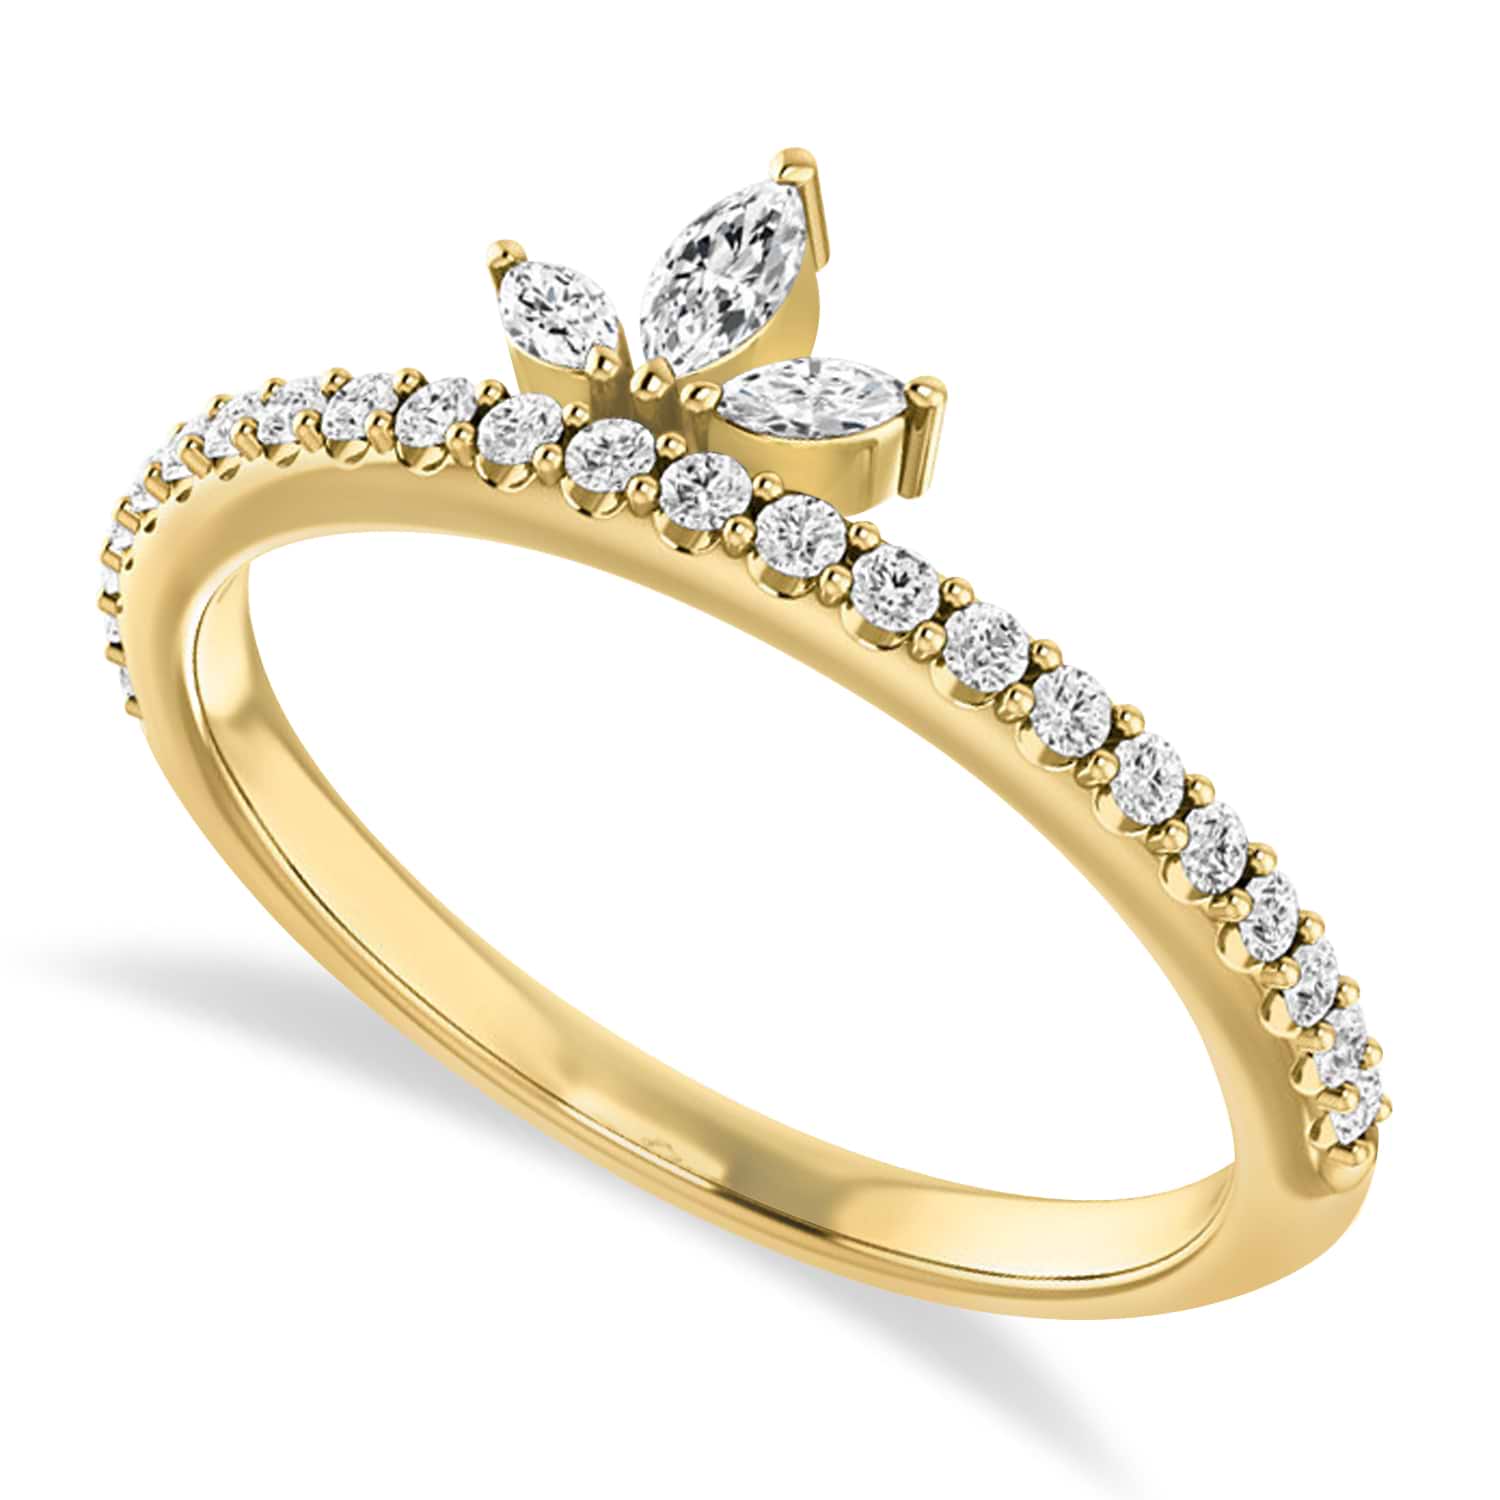 Diamond Stackable Crown Ring/Wedding Band 14k Yellow Gold (0.38ct)